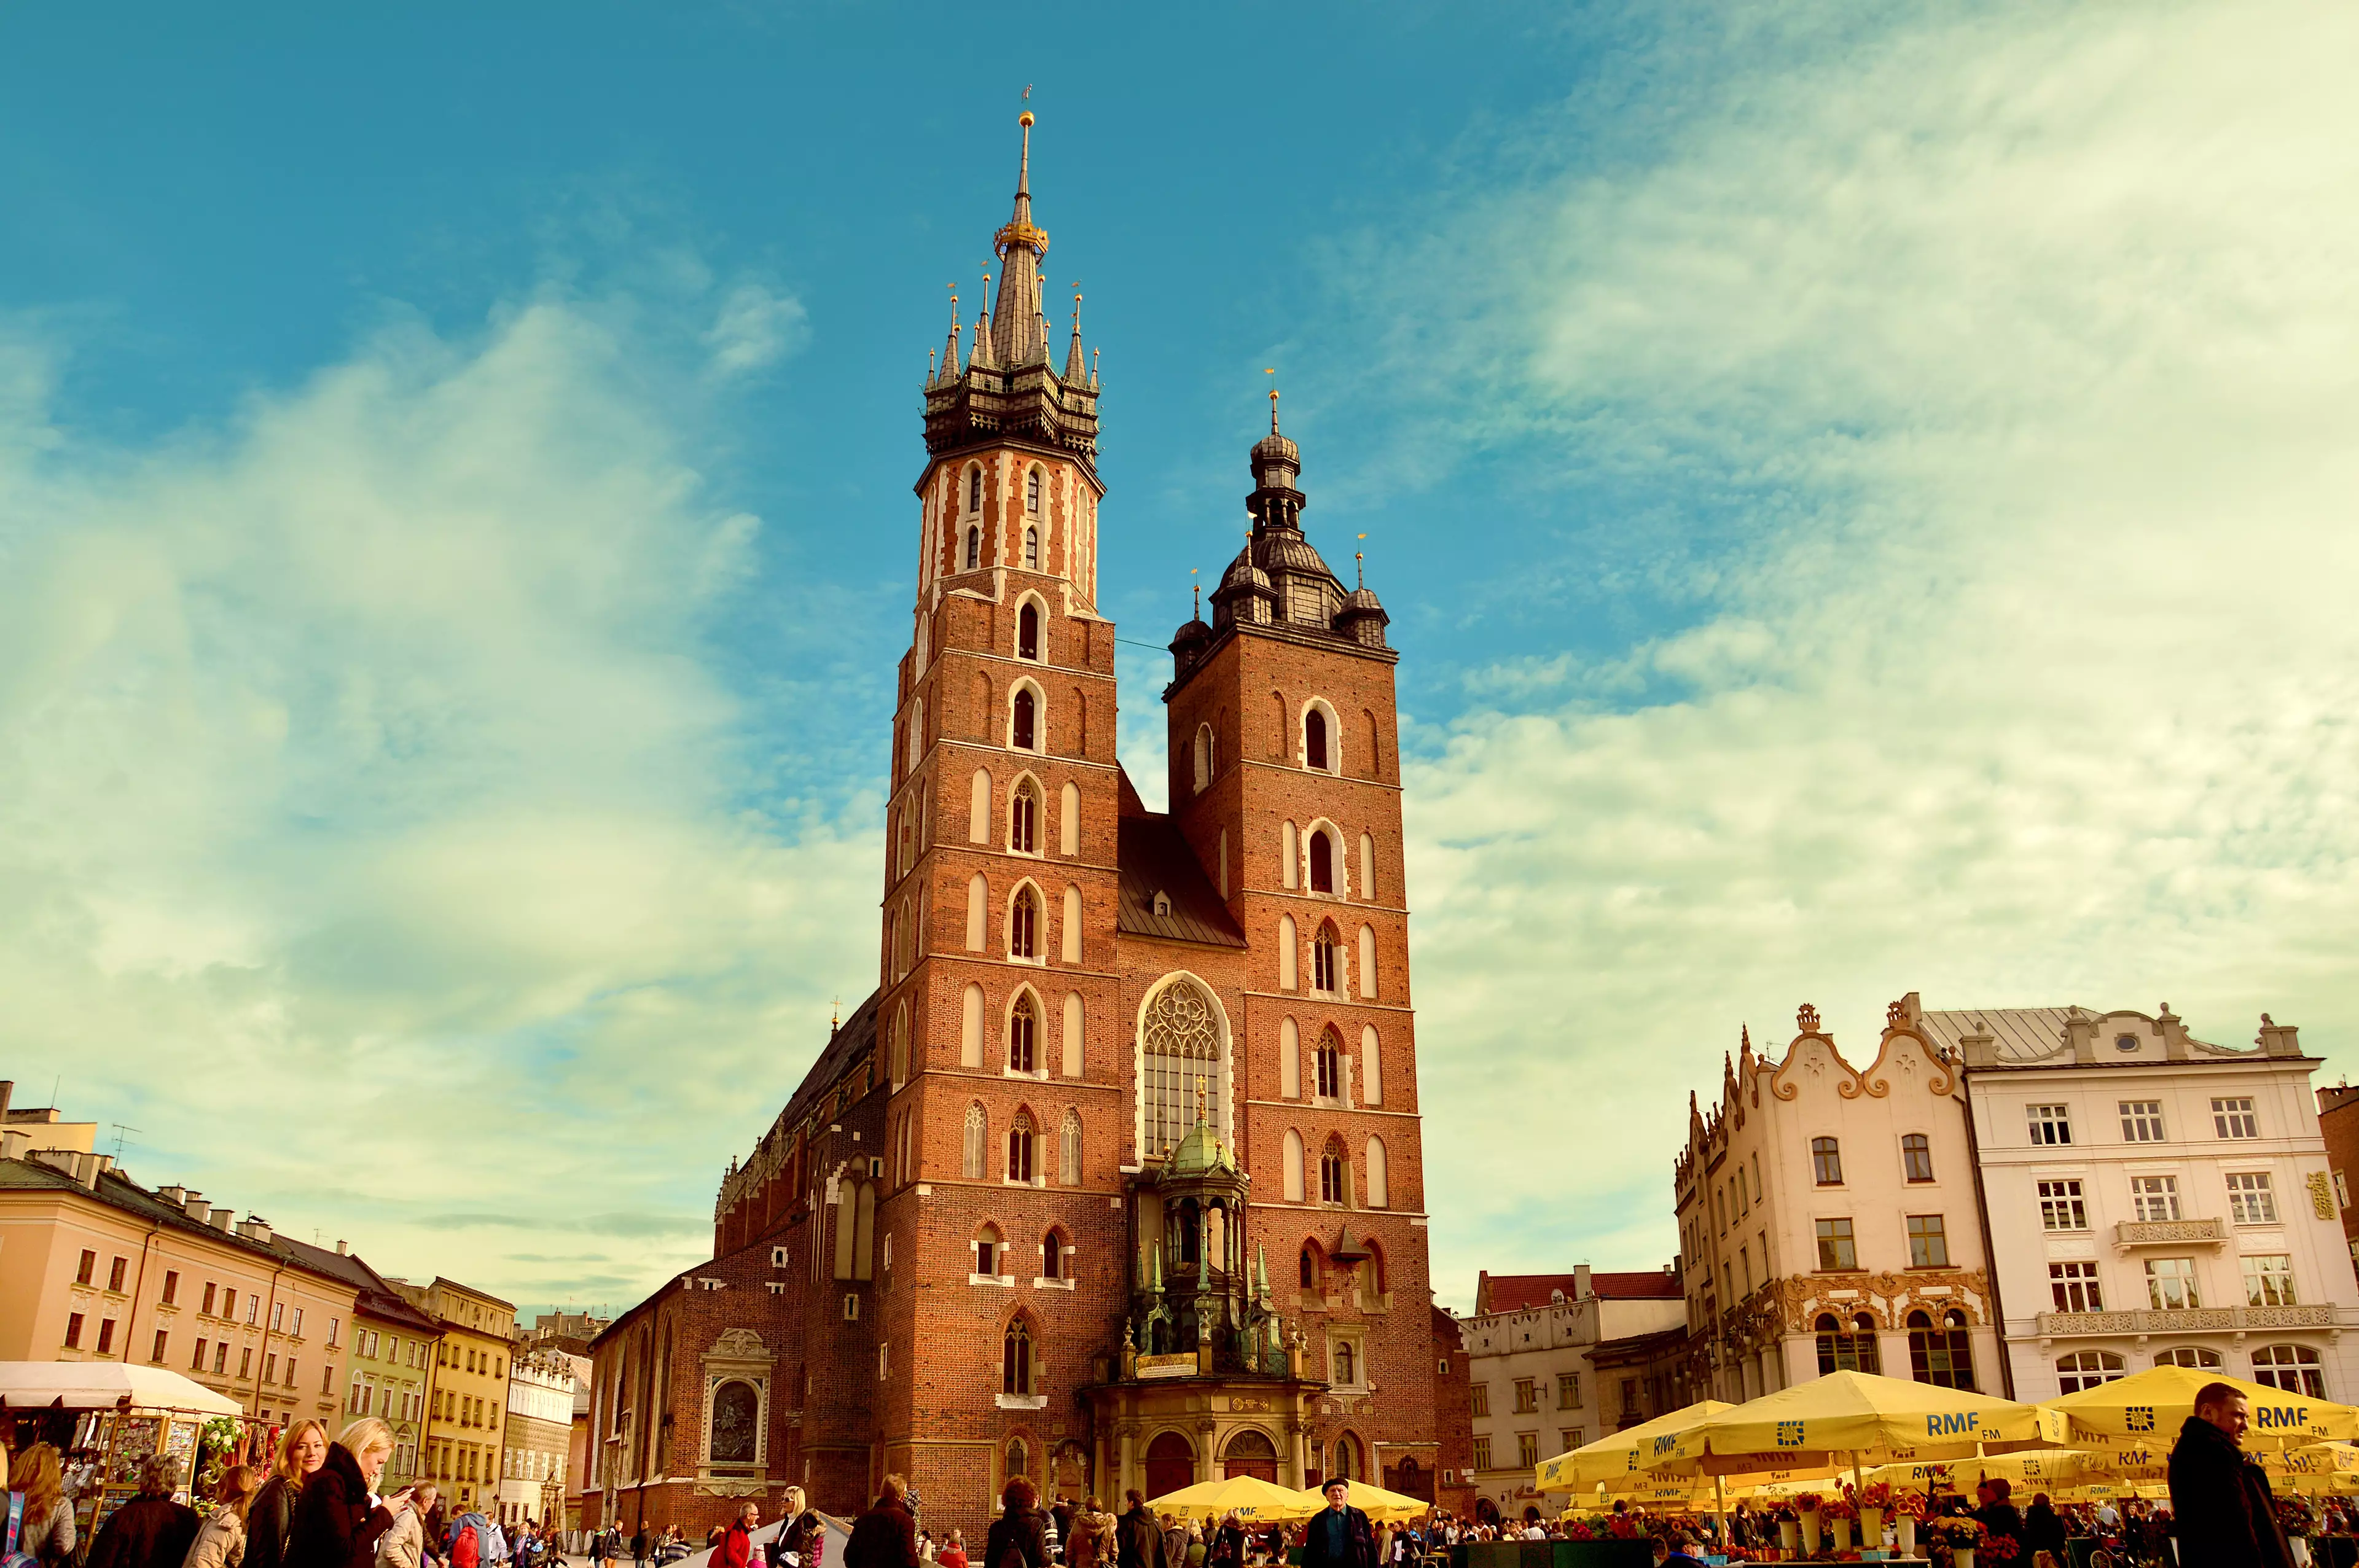 Interested in travelling to Krakow from £99?